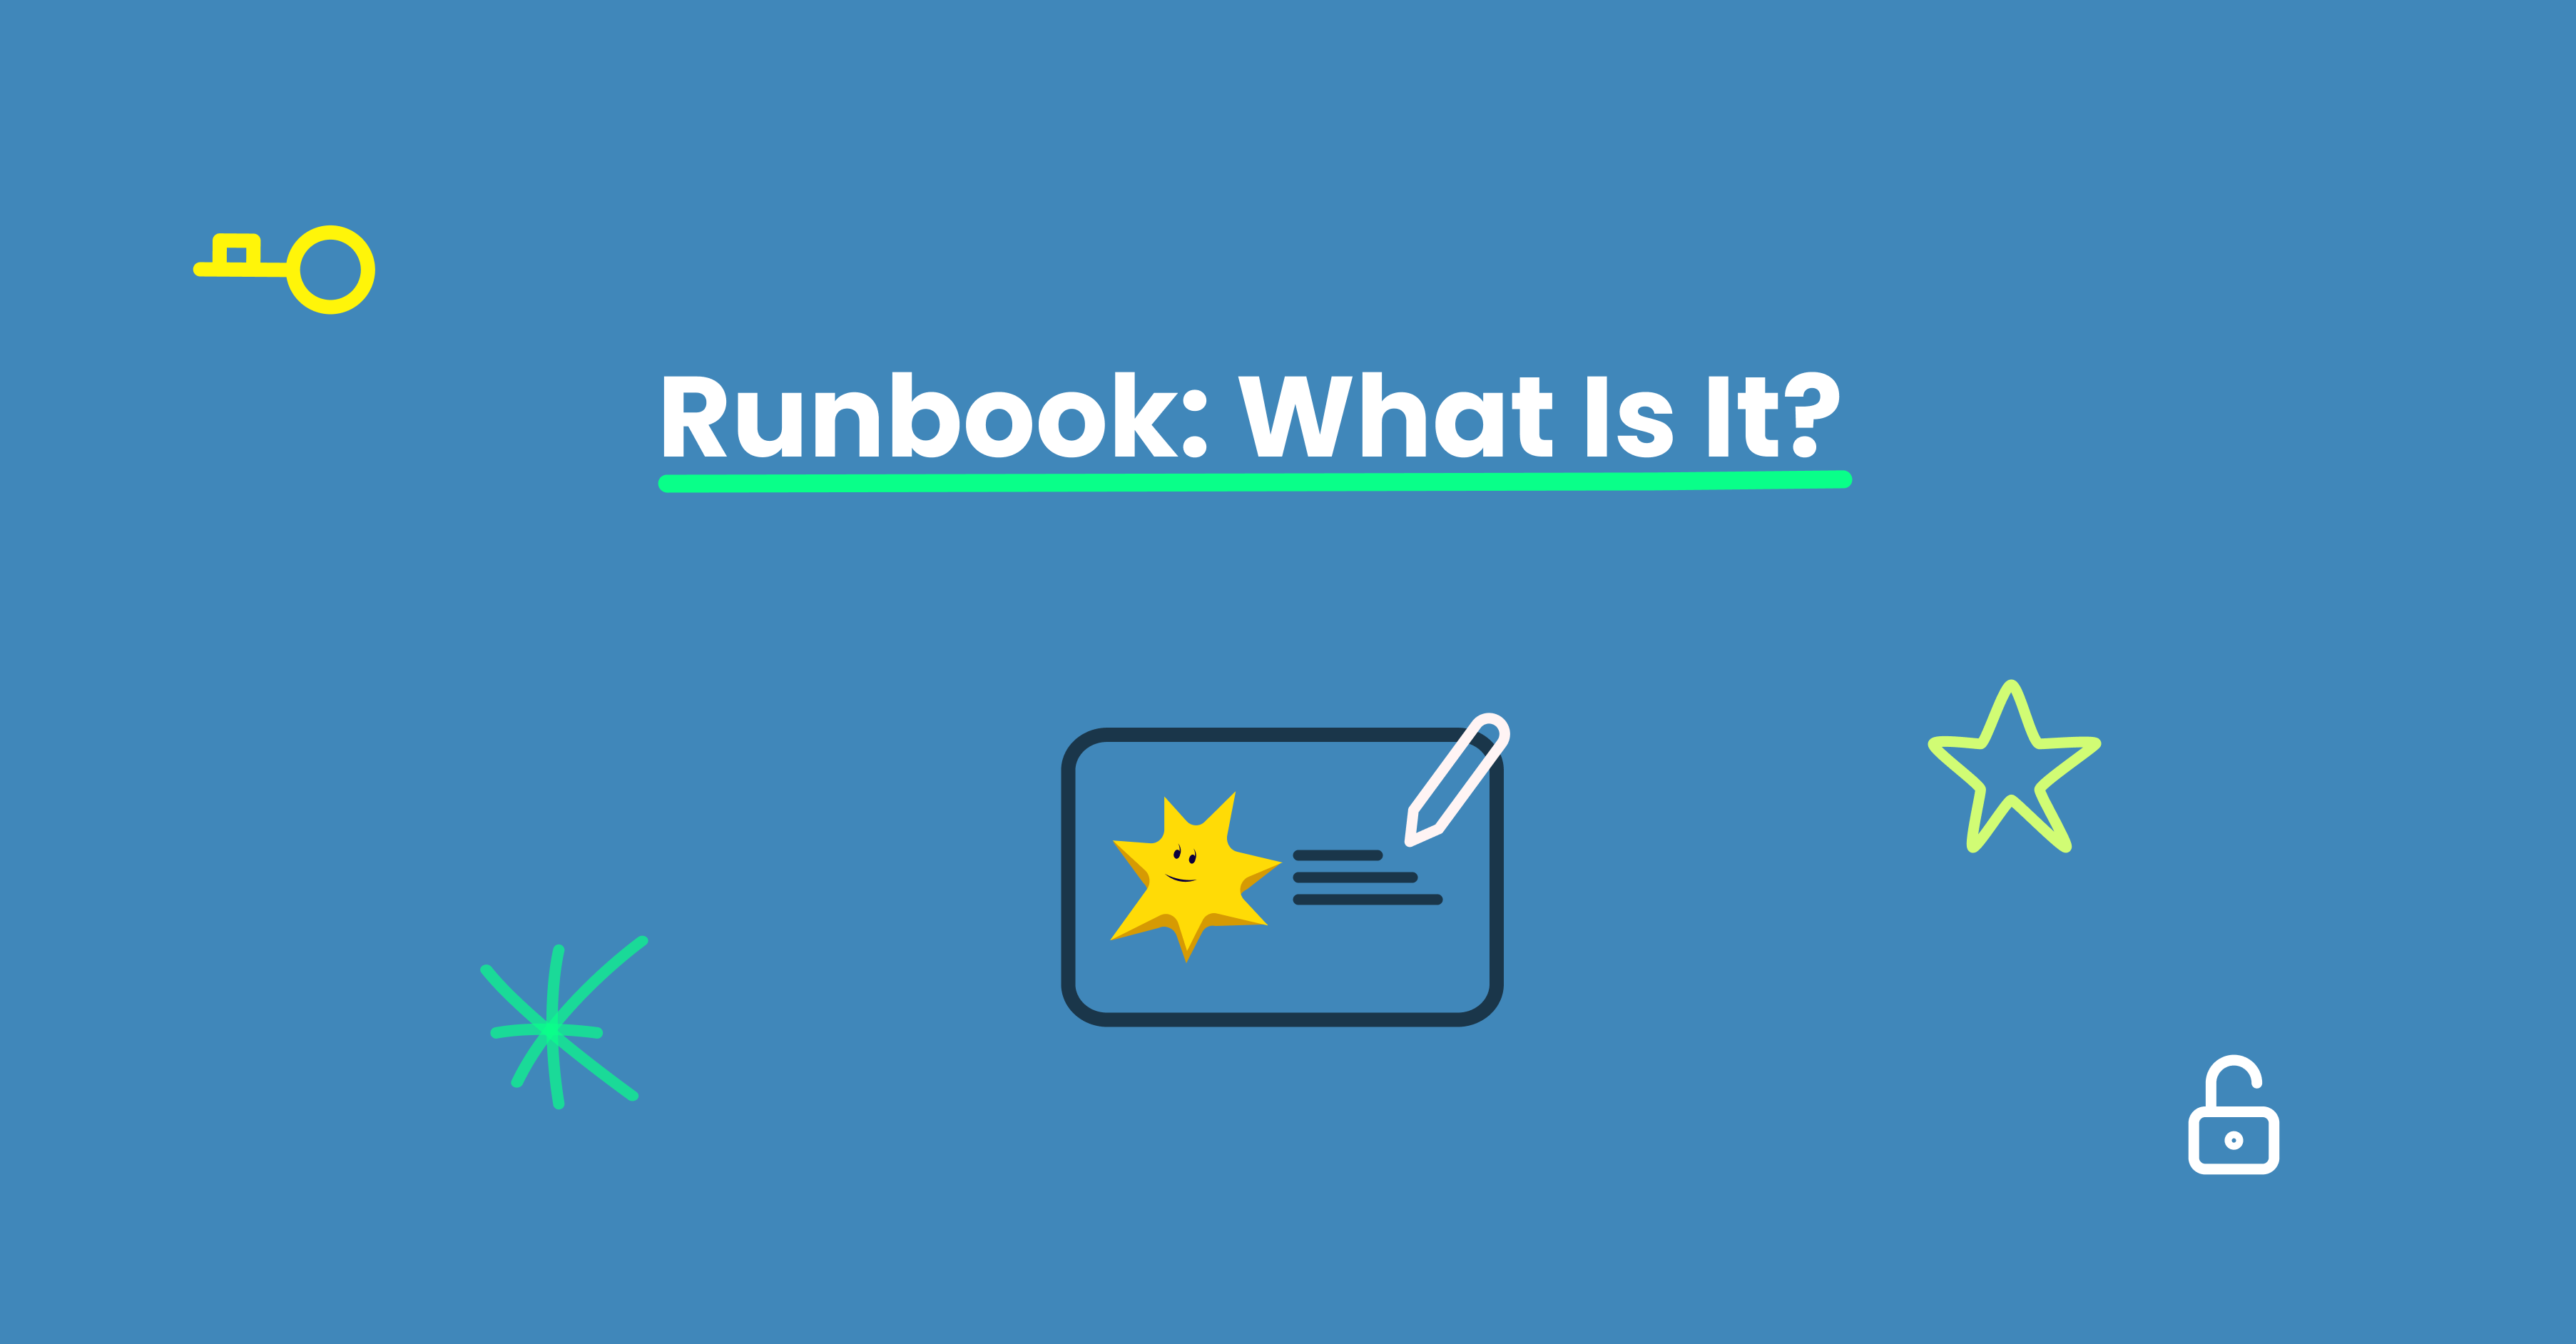 Runbook: What is it?